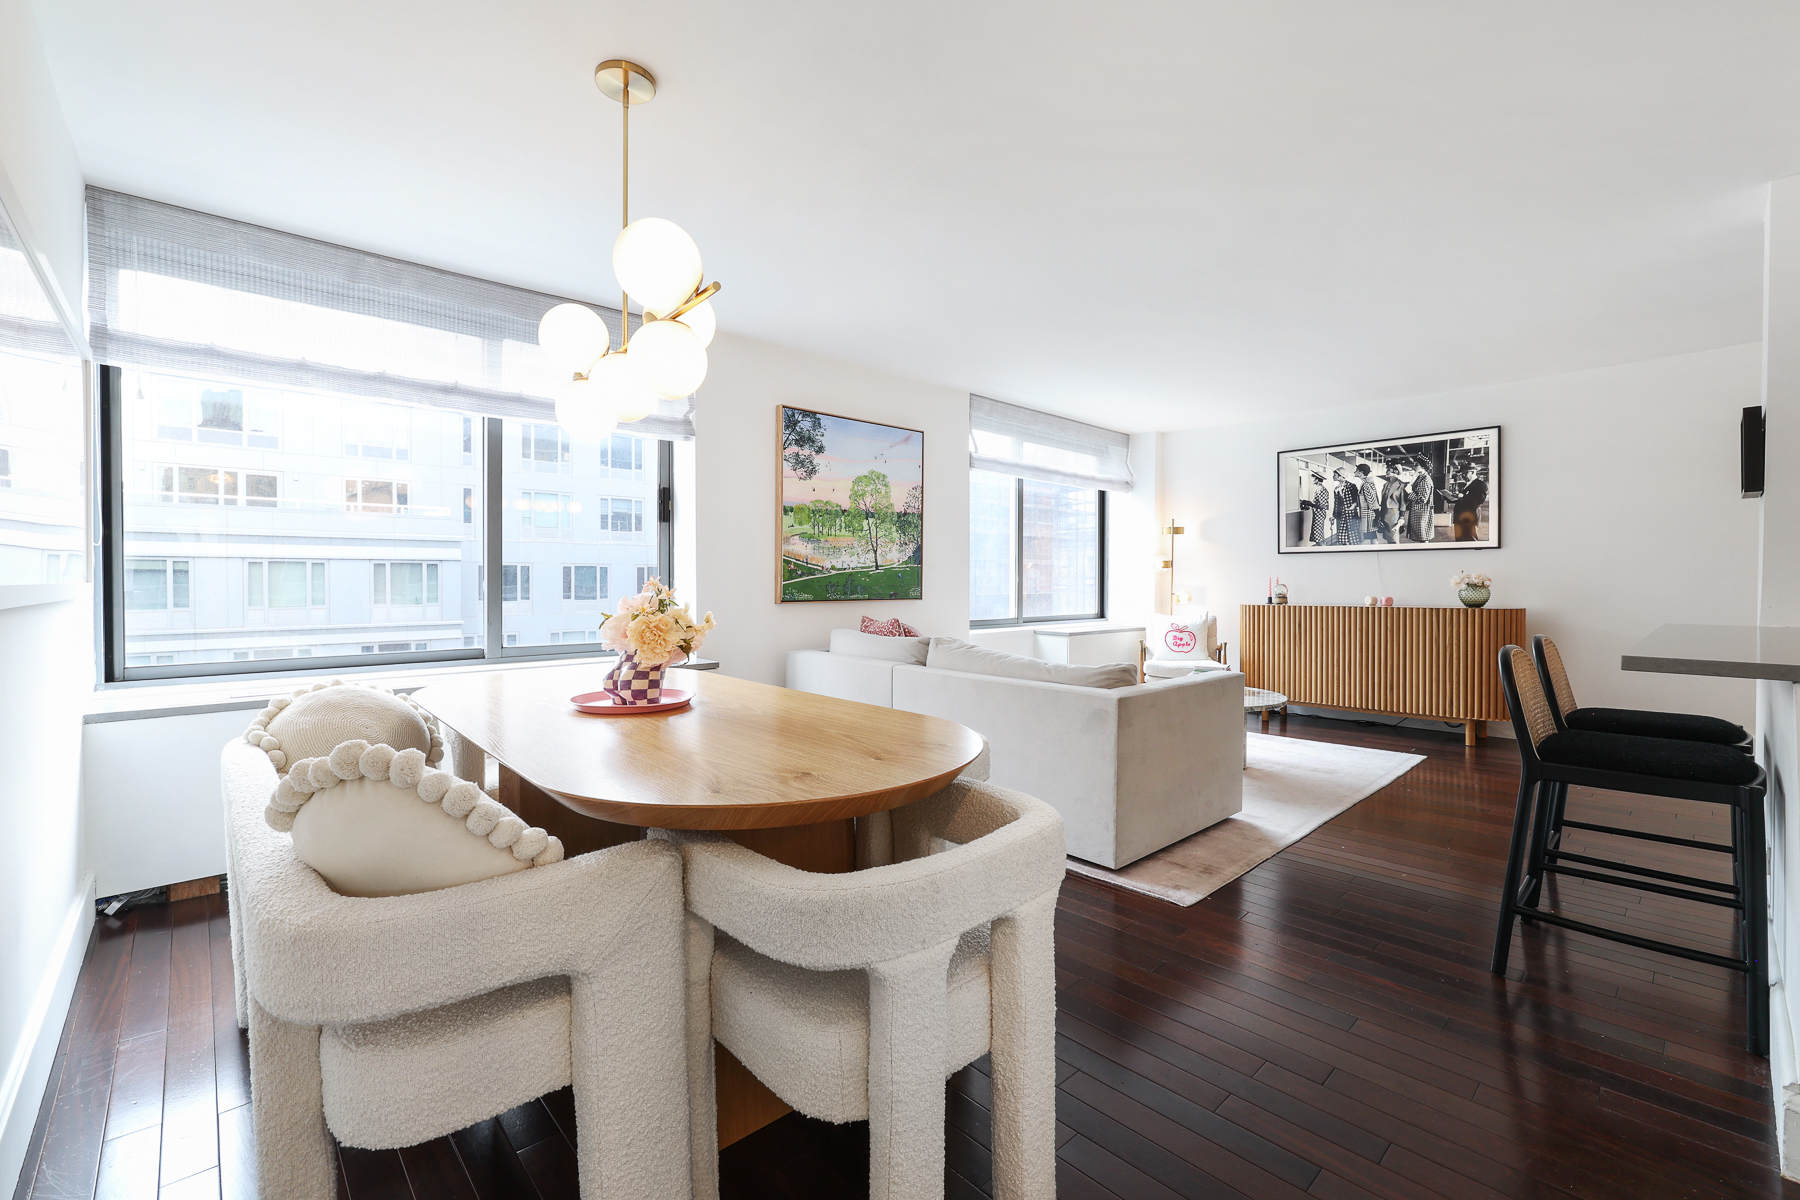 270 West 17th Street 5L, Hudson Yards-Chelsea-Flatiron-Union Square,  - 2 Bedrooms  
2 Bathrooms  
5 Rooms - 